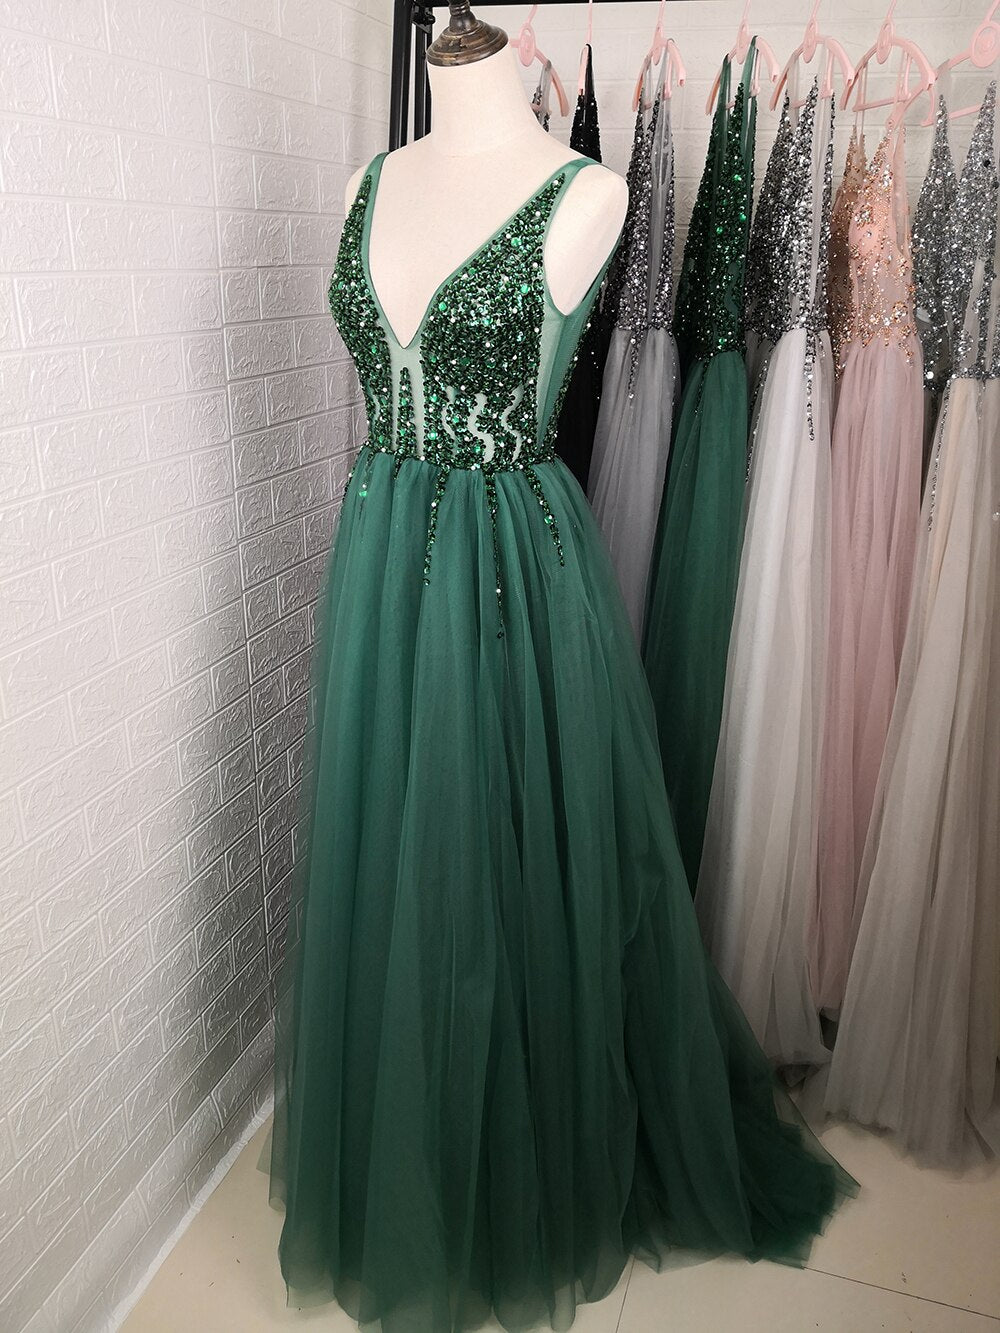 Sexy V-Neck Long Prom Dresses 2020 Beaded Beading Crystal High Splits Backless A-Line Formal Gown Party Dress